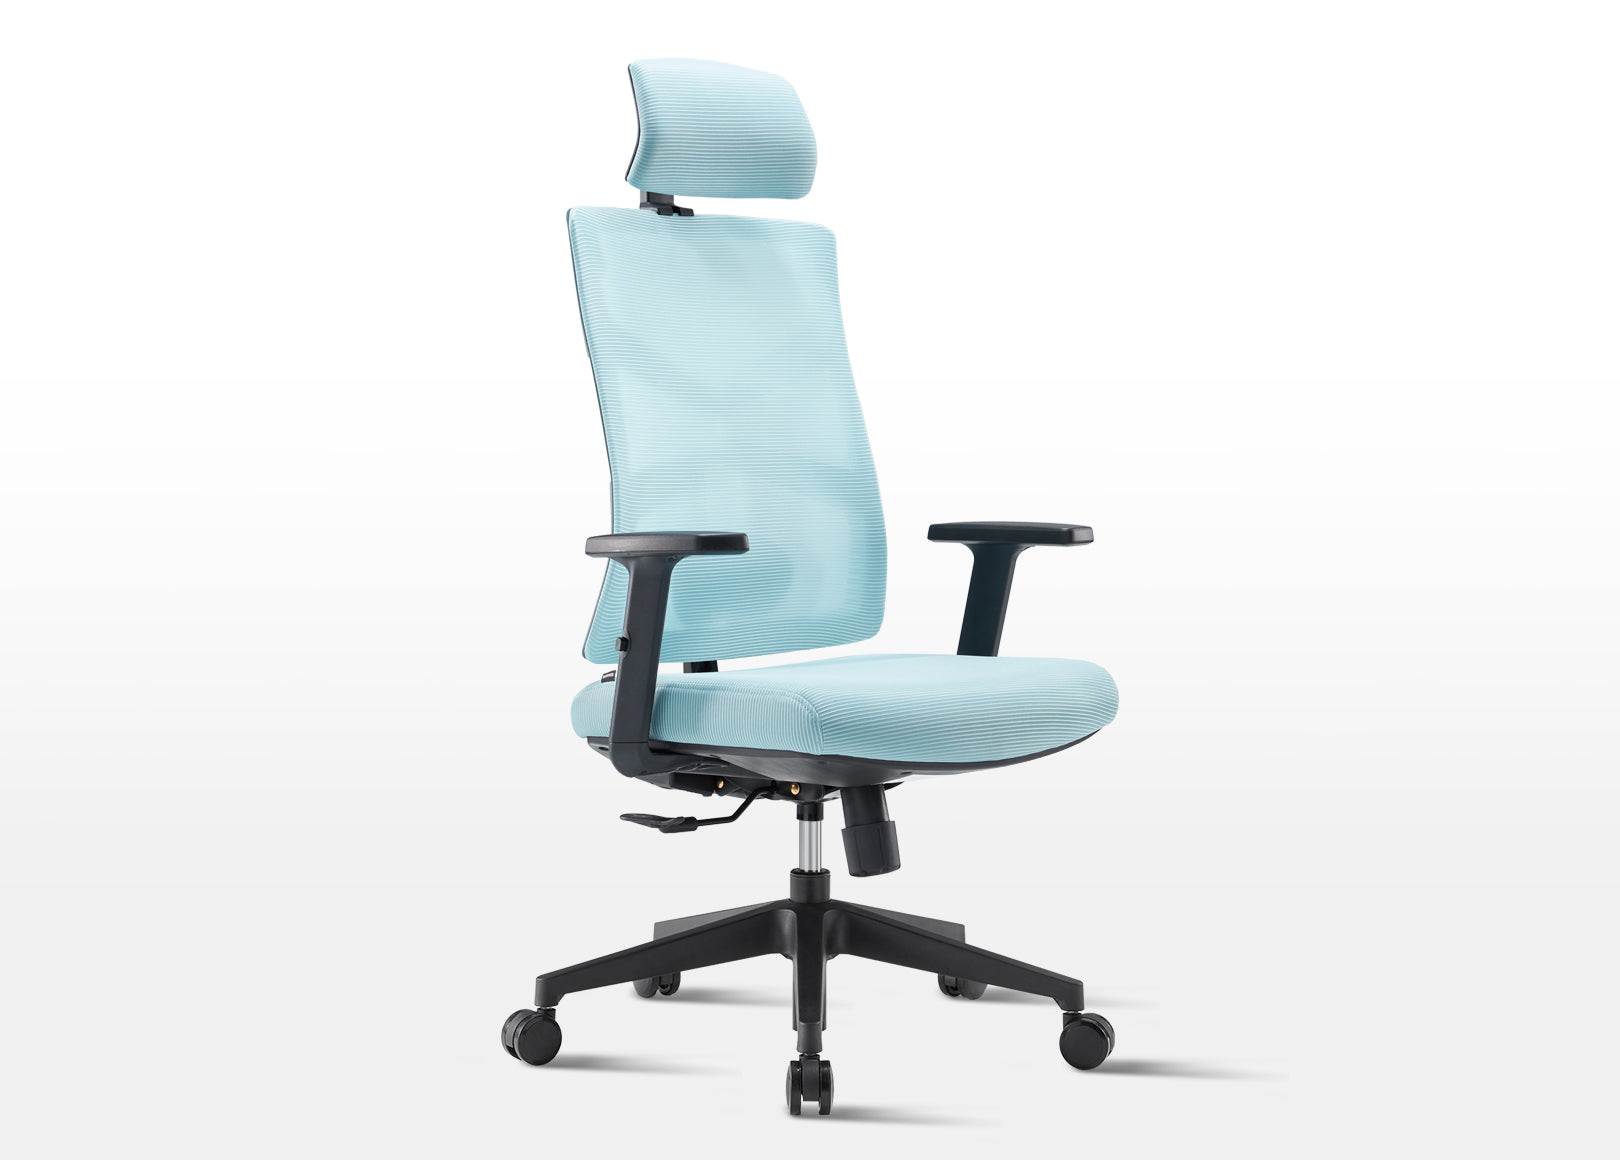 Stylish Cyan Ergonomic Chair for Home Office - Best Desk Chair with Lumbar Support, Armrests, and Adjustable Headrest